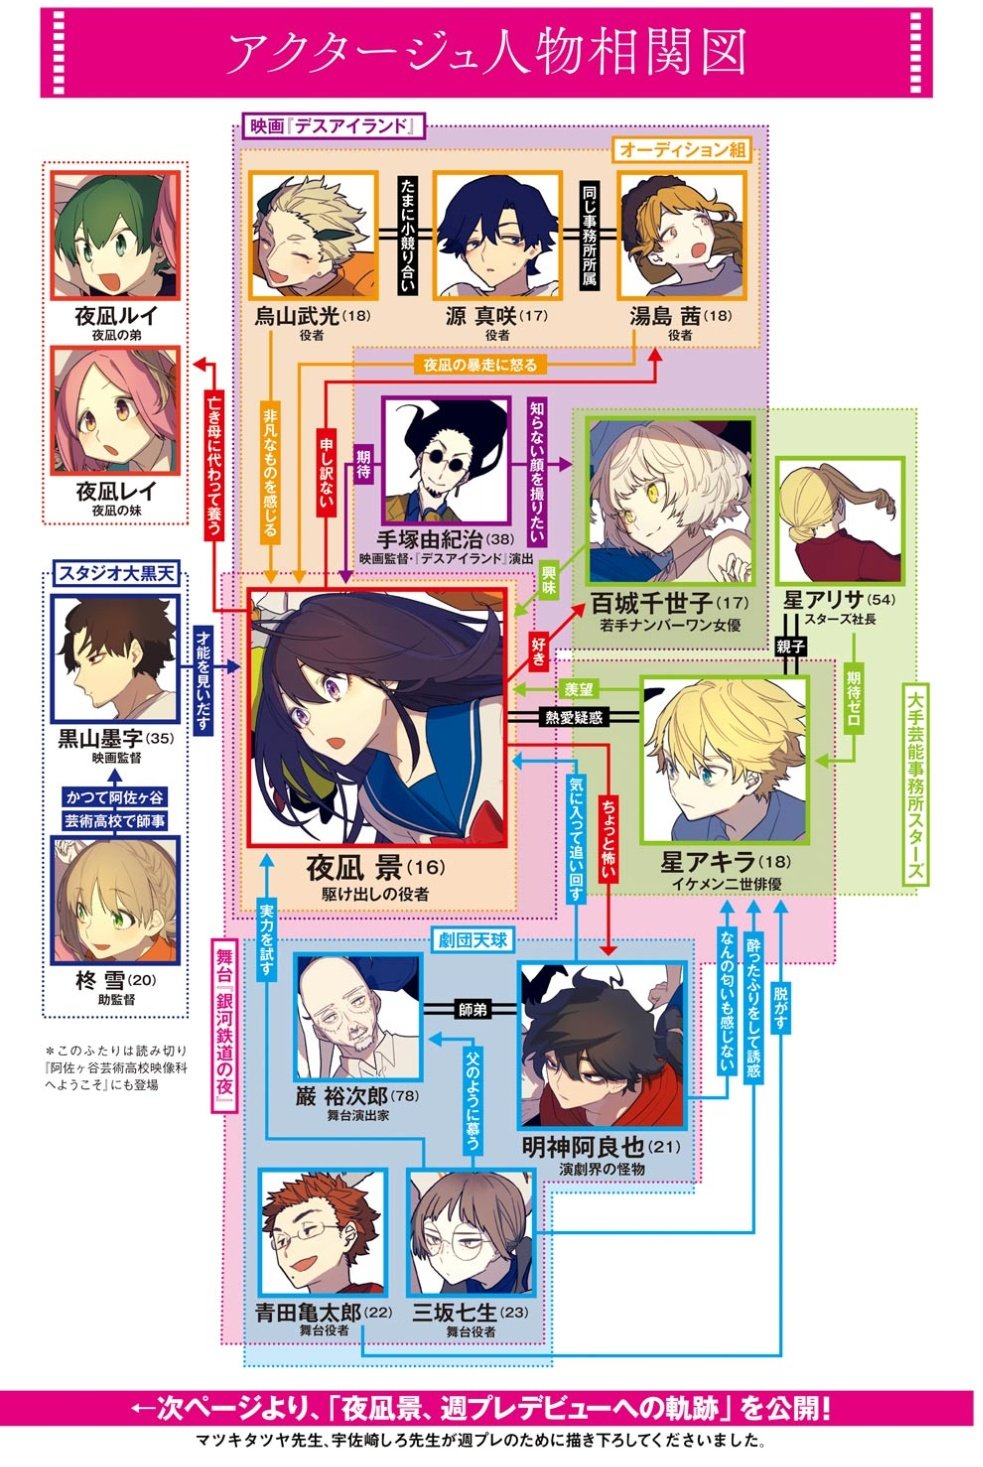 Manganimy Act Age Characters Relationships Diagram T Co 31rthpeahk Twitter